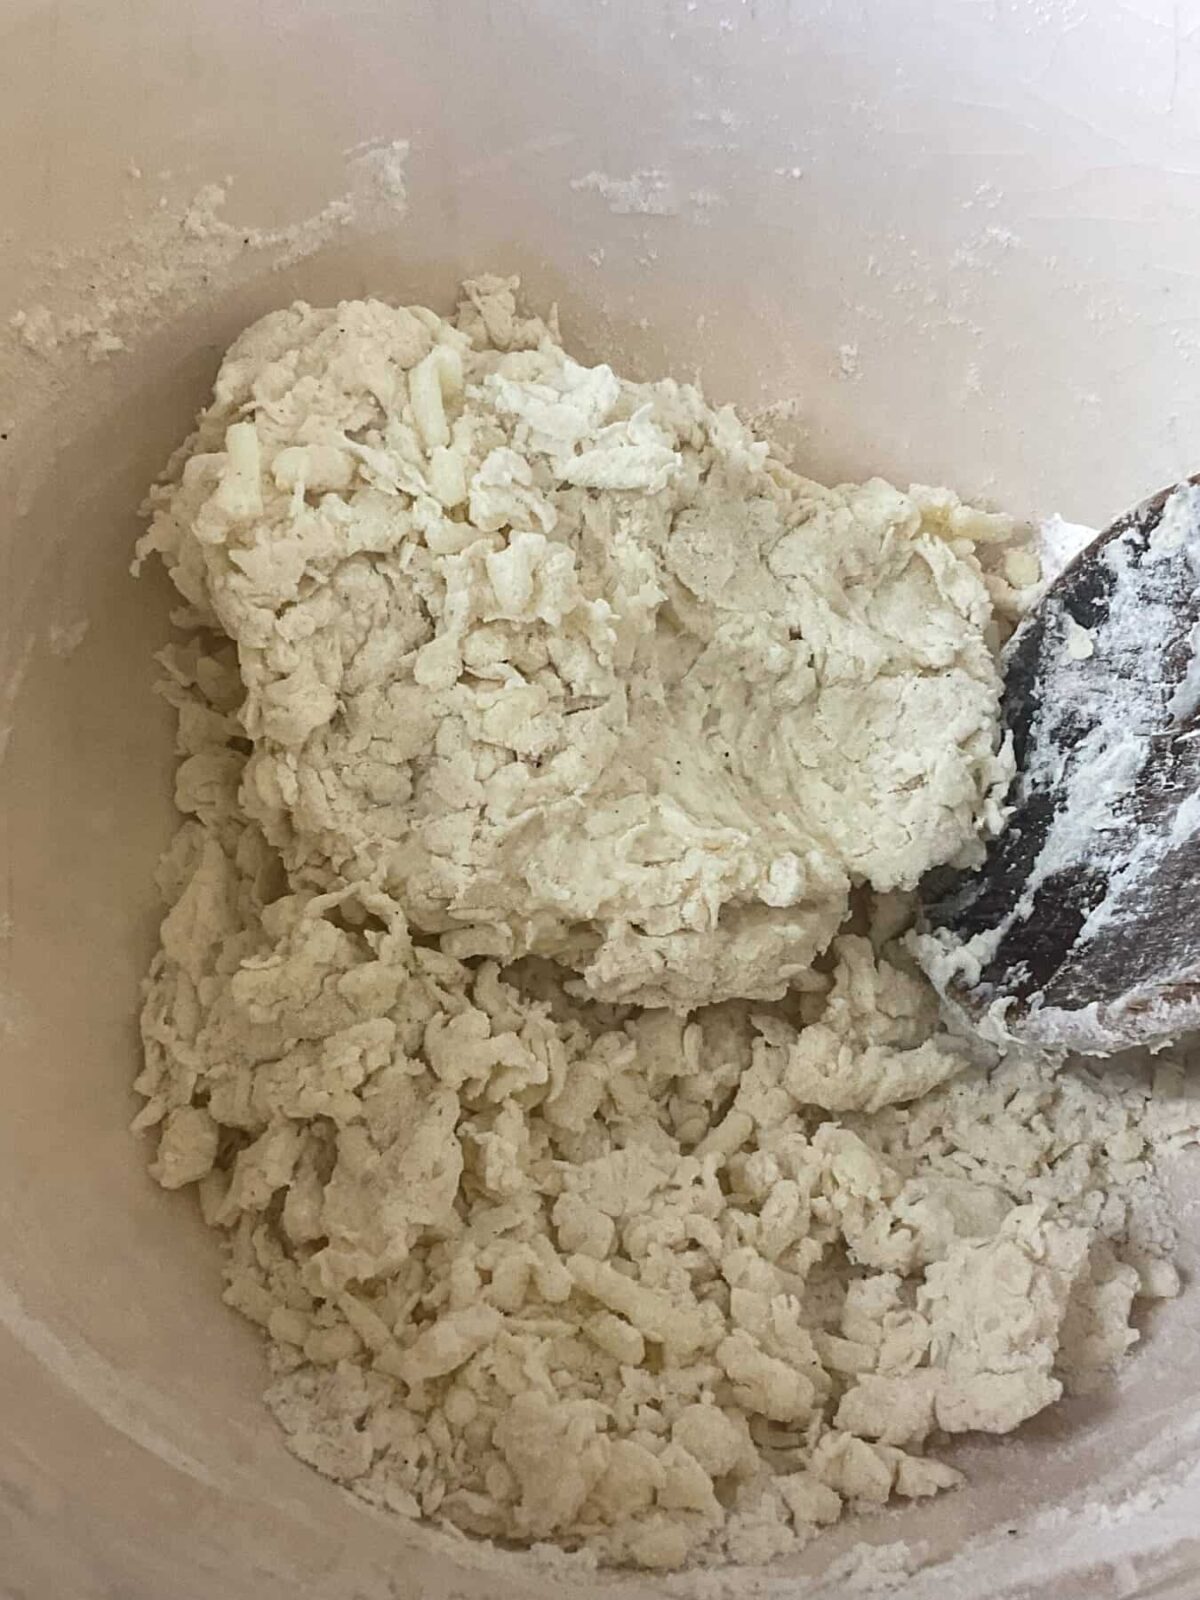 Dumpling mixture forming in mixing bowl with wooden spoon.